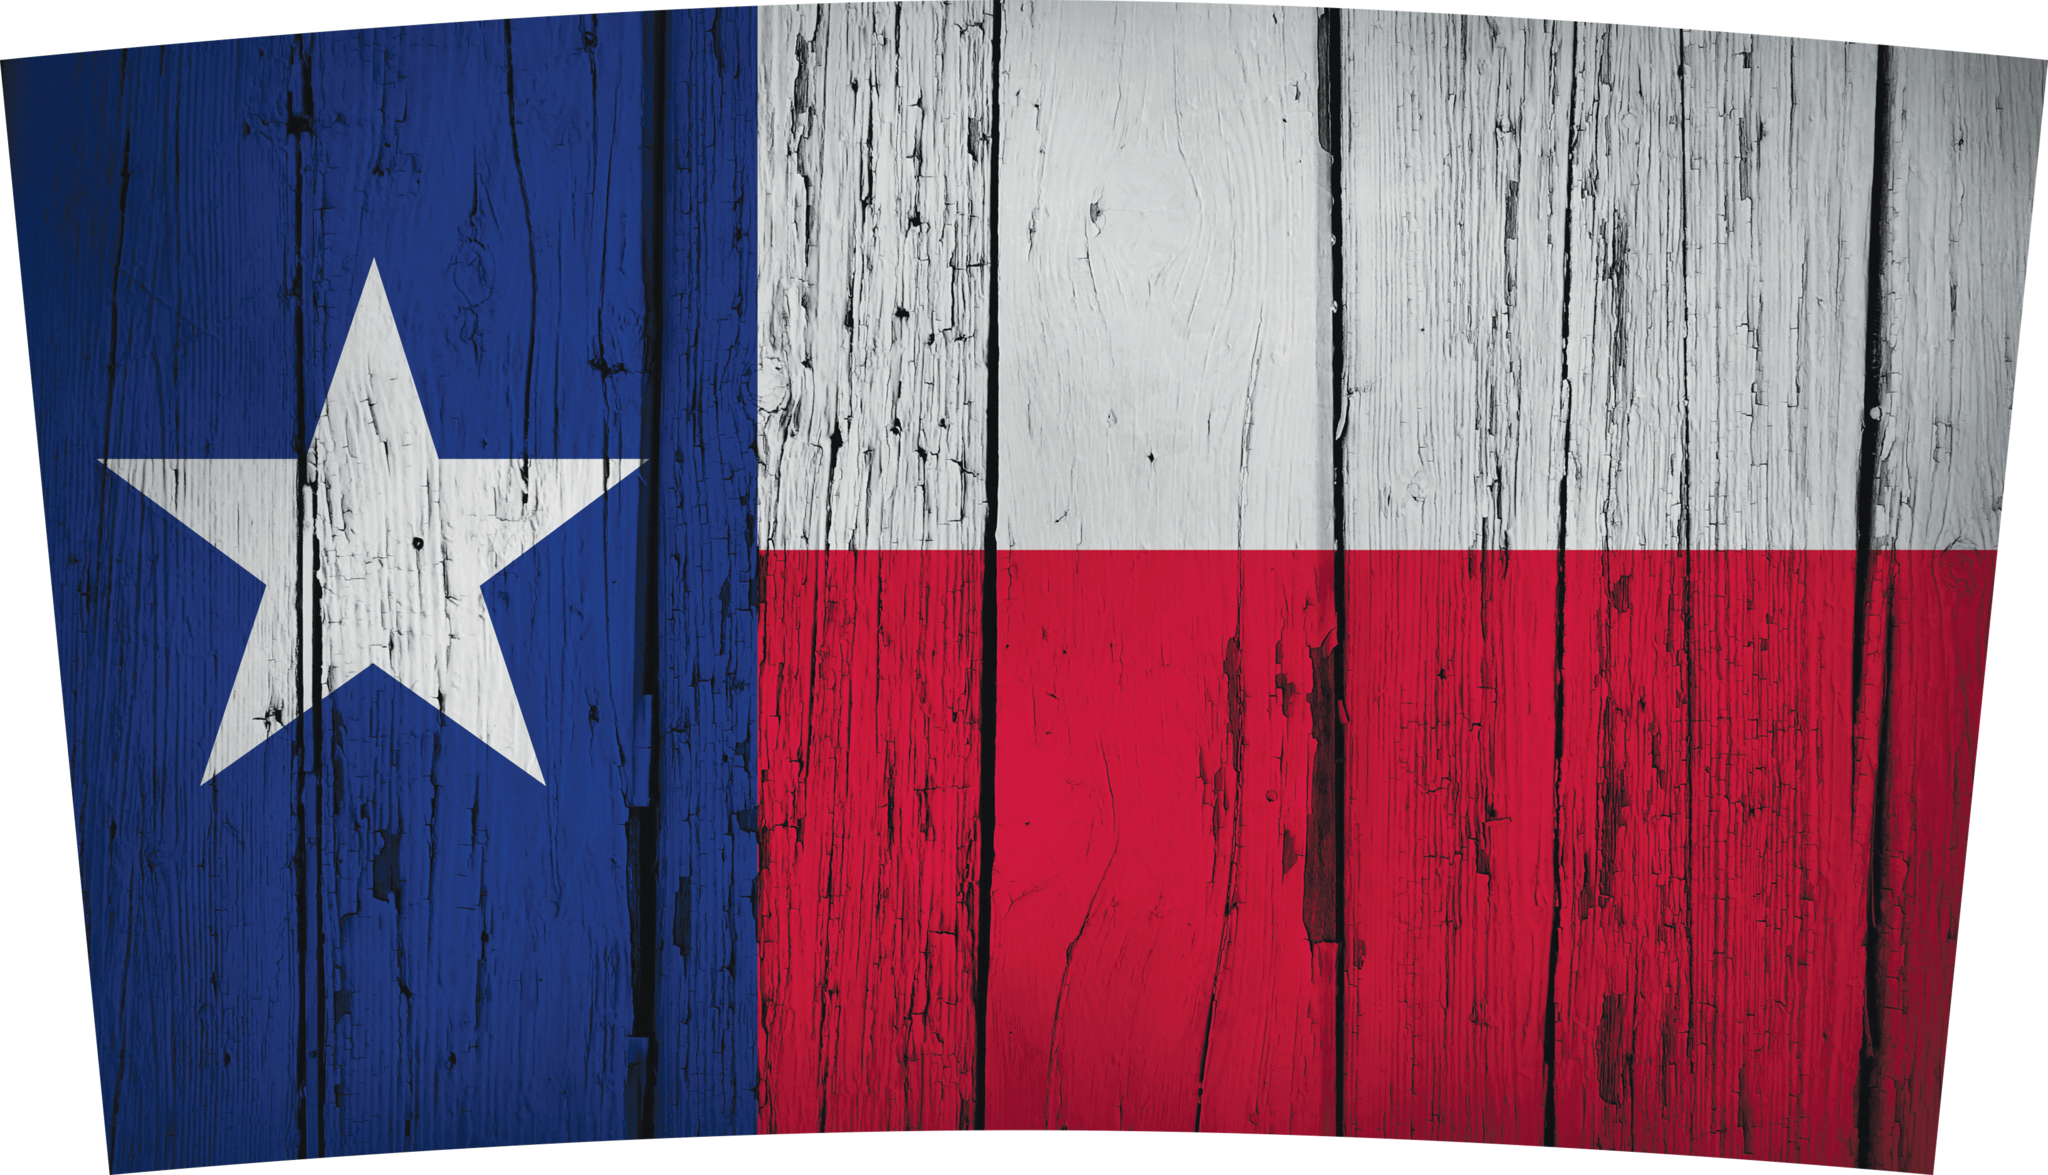 Texas Recovery Act